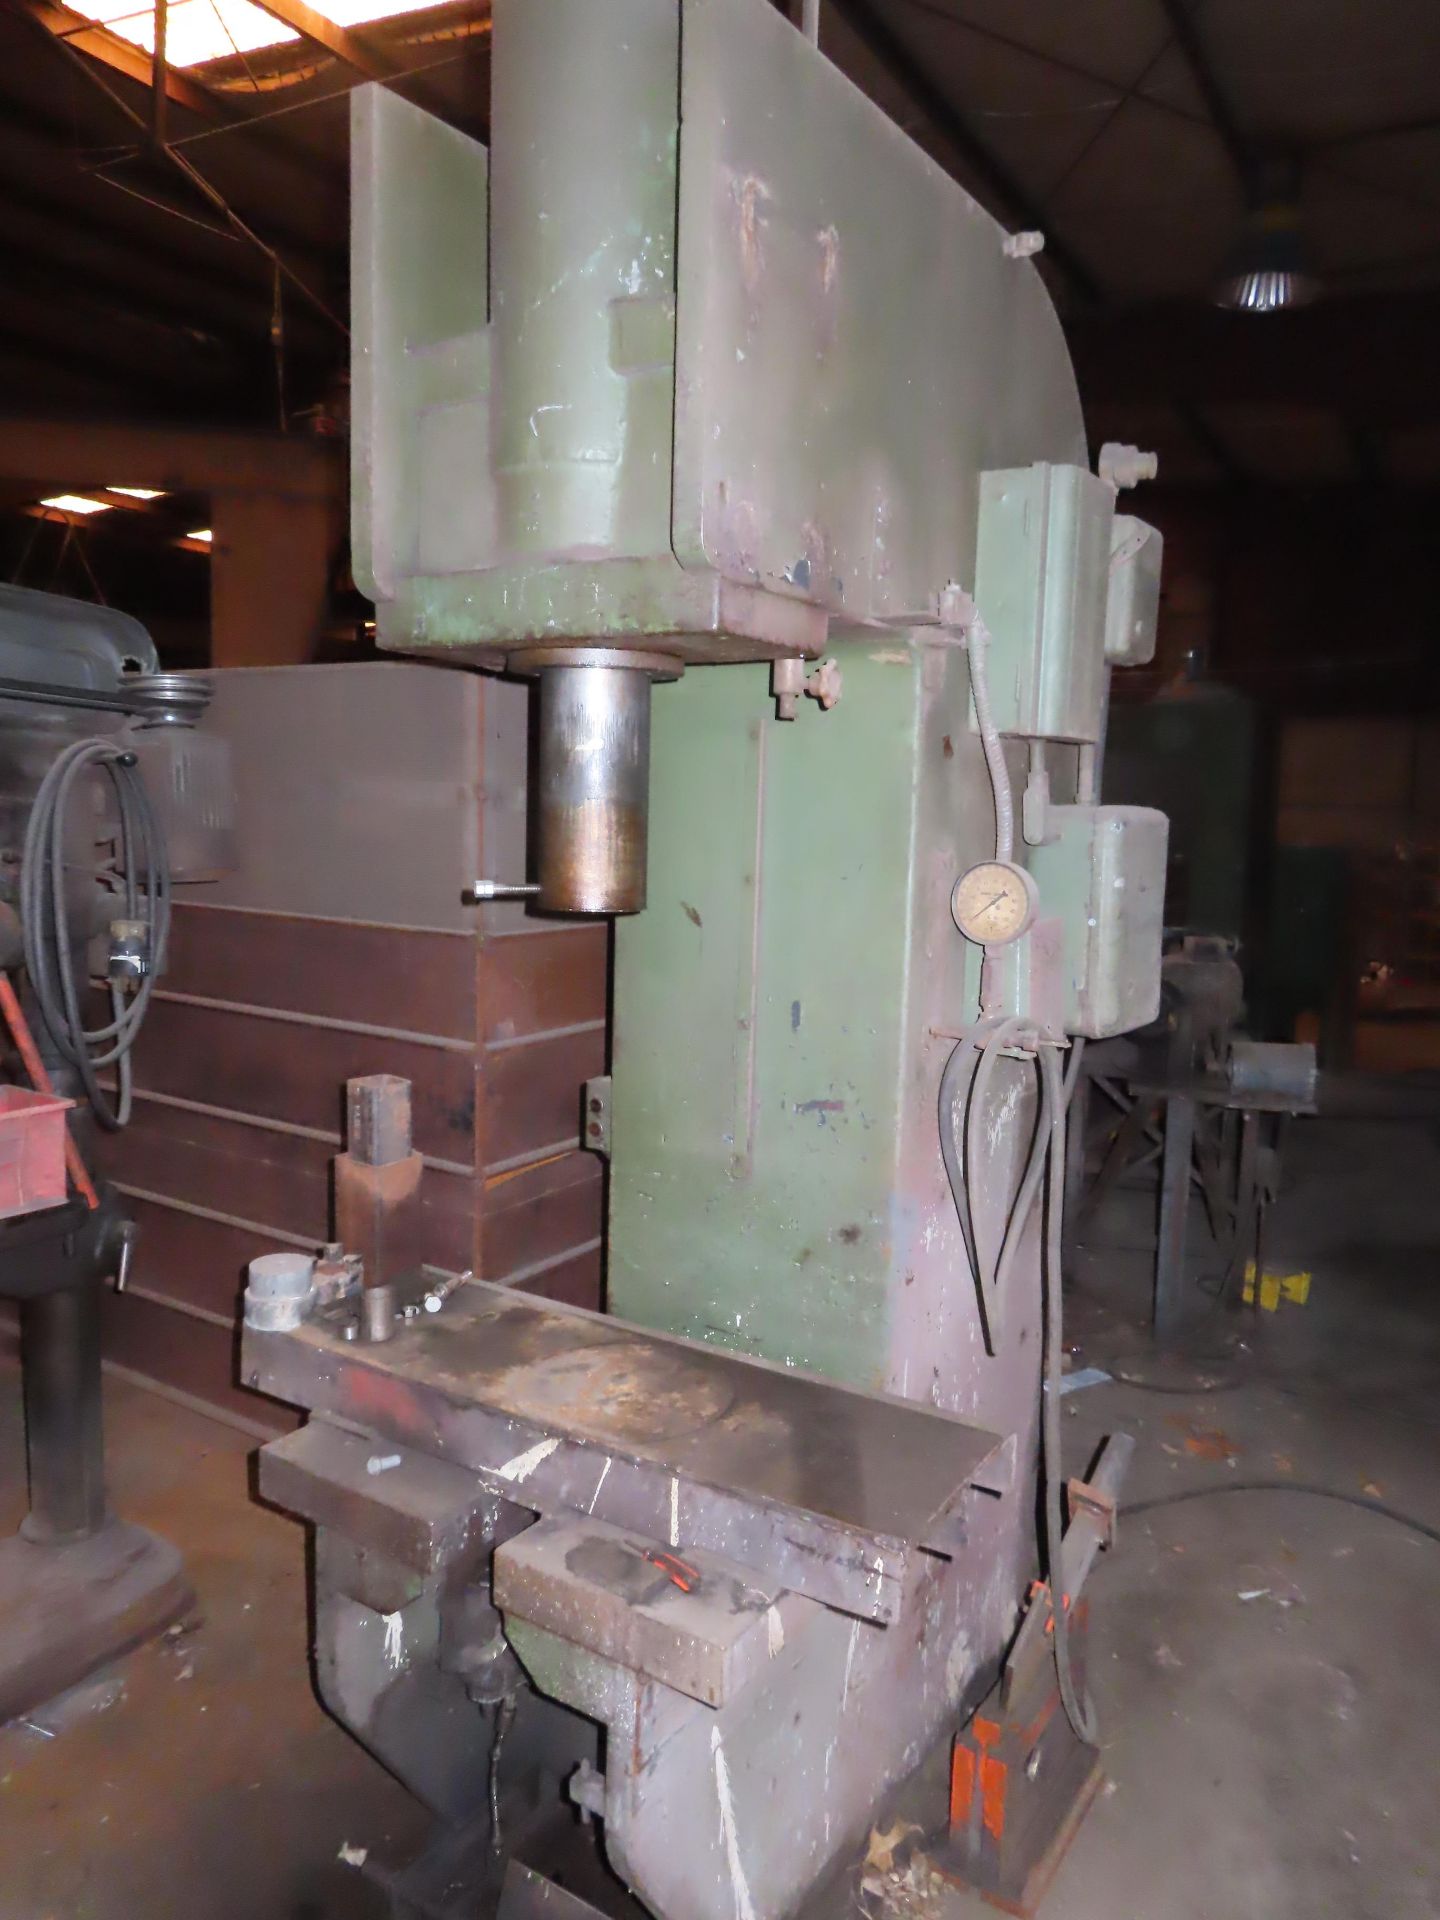 HYD. PUNCH PRESS, APPROX. 300 TON CAP., 15" THROAT, APPROX. 24" STROKEBLDG: 2 - HYD. PUNCH PRESS, AP - Image 3 of 4